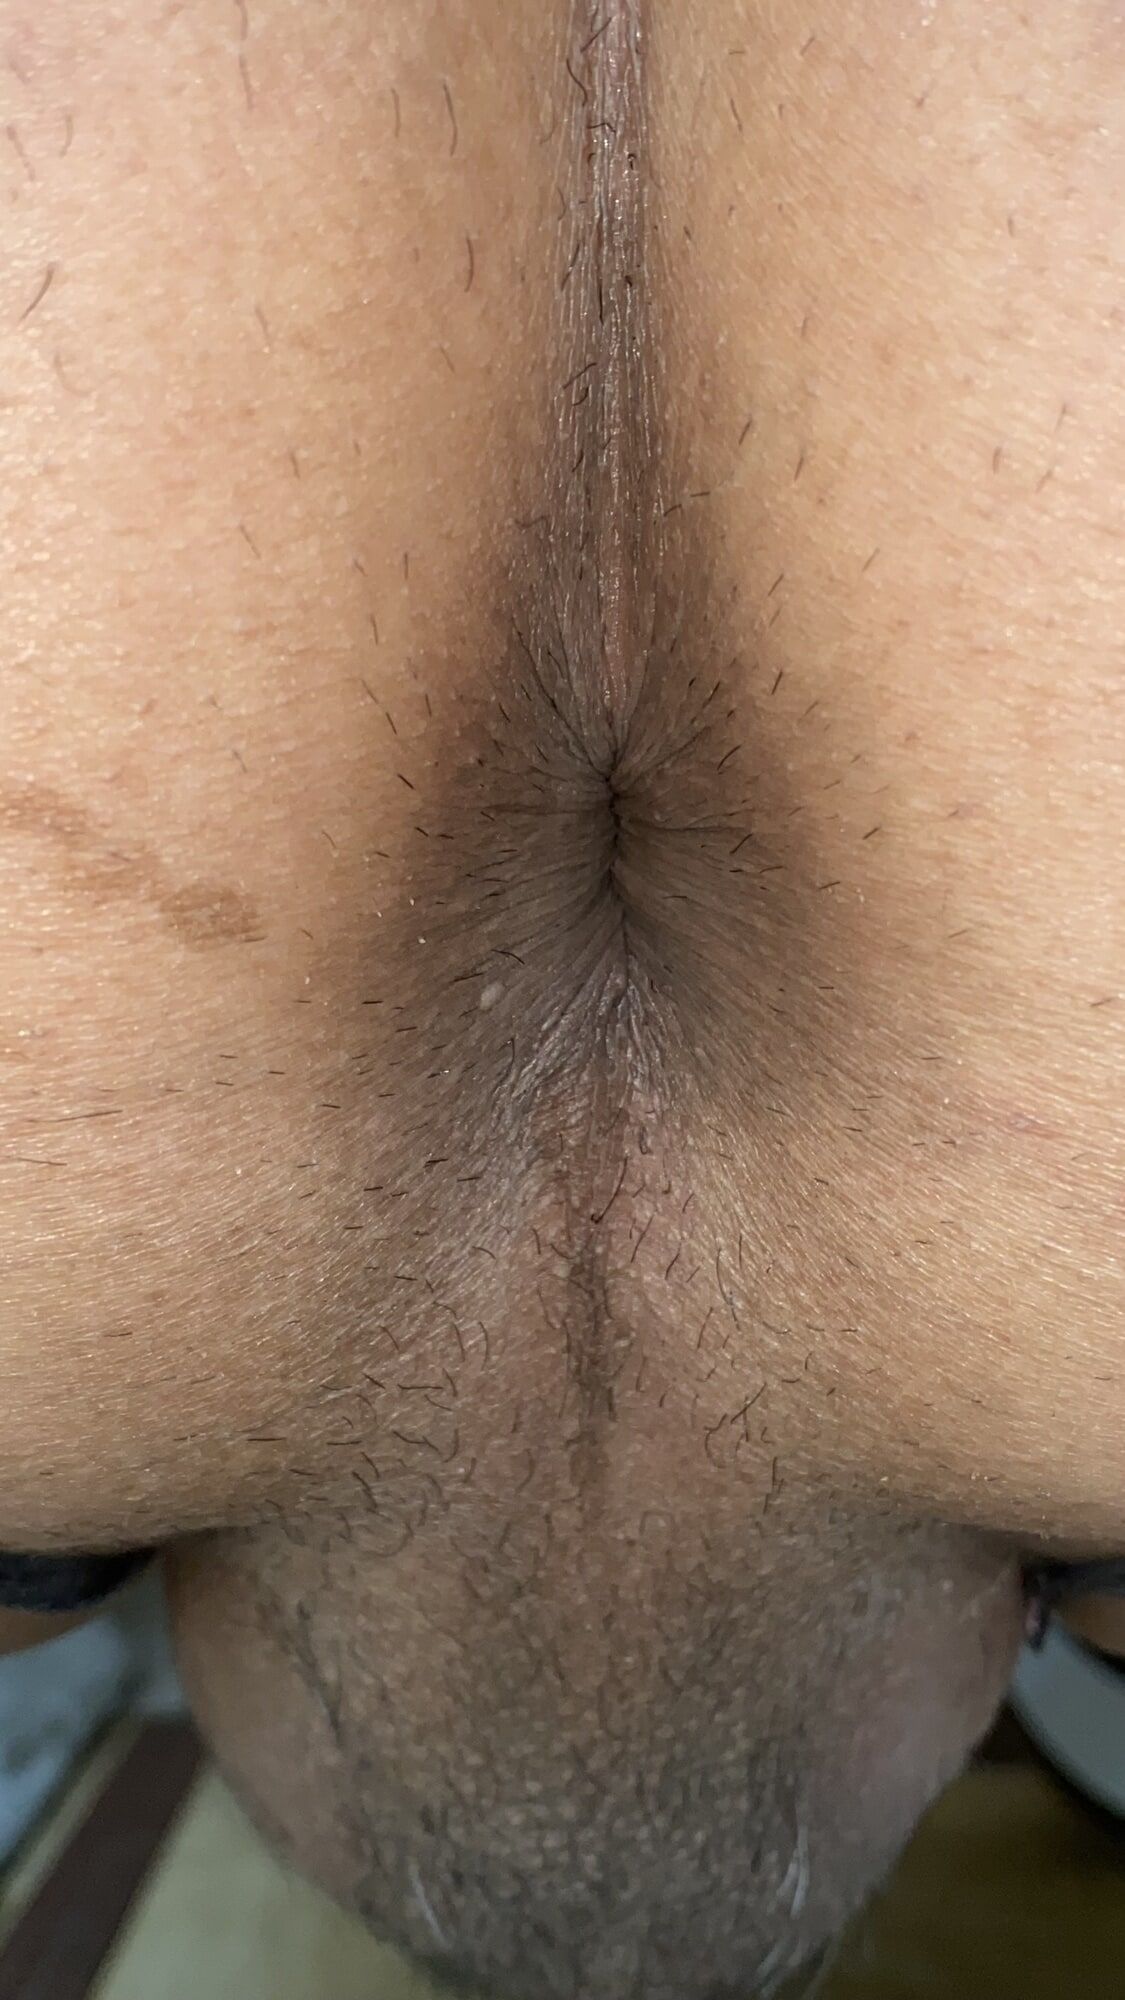 An image of my anus that is clear to every single wrinkle #36